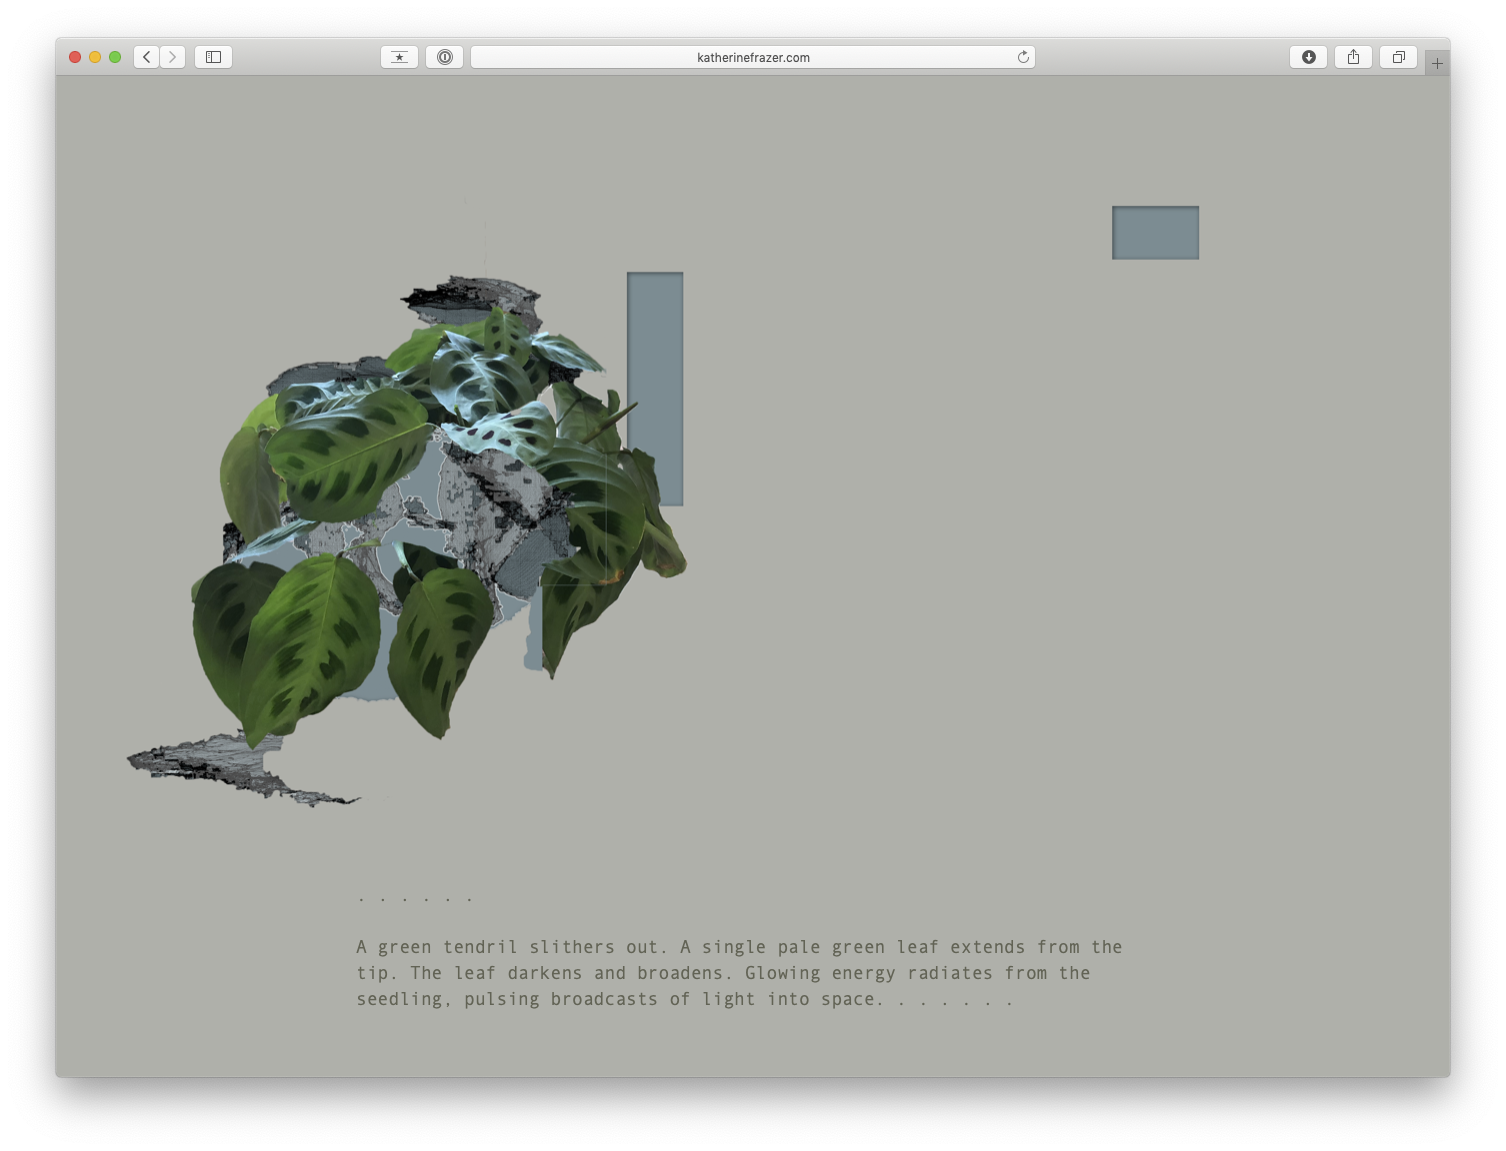 a screenshot of a browser on a simple website. a manipulated image of a plant appears alongside text